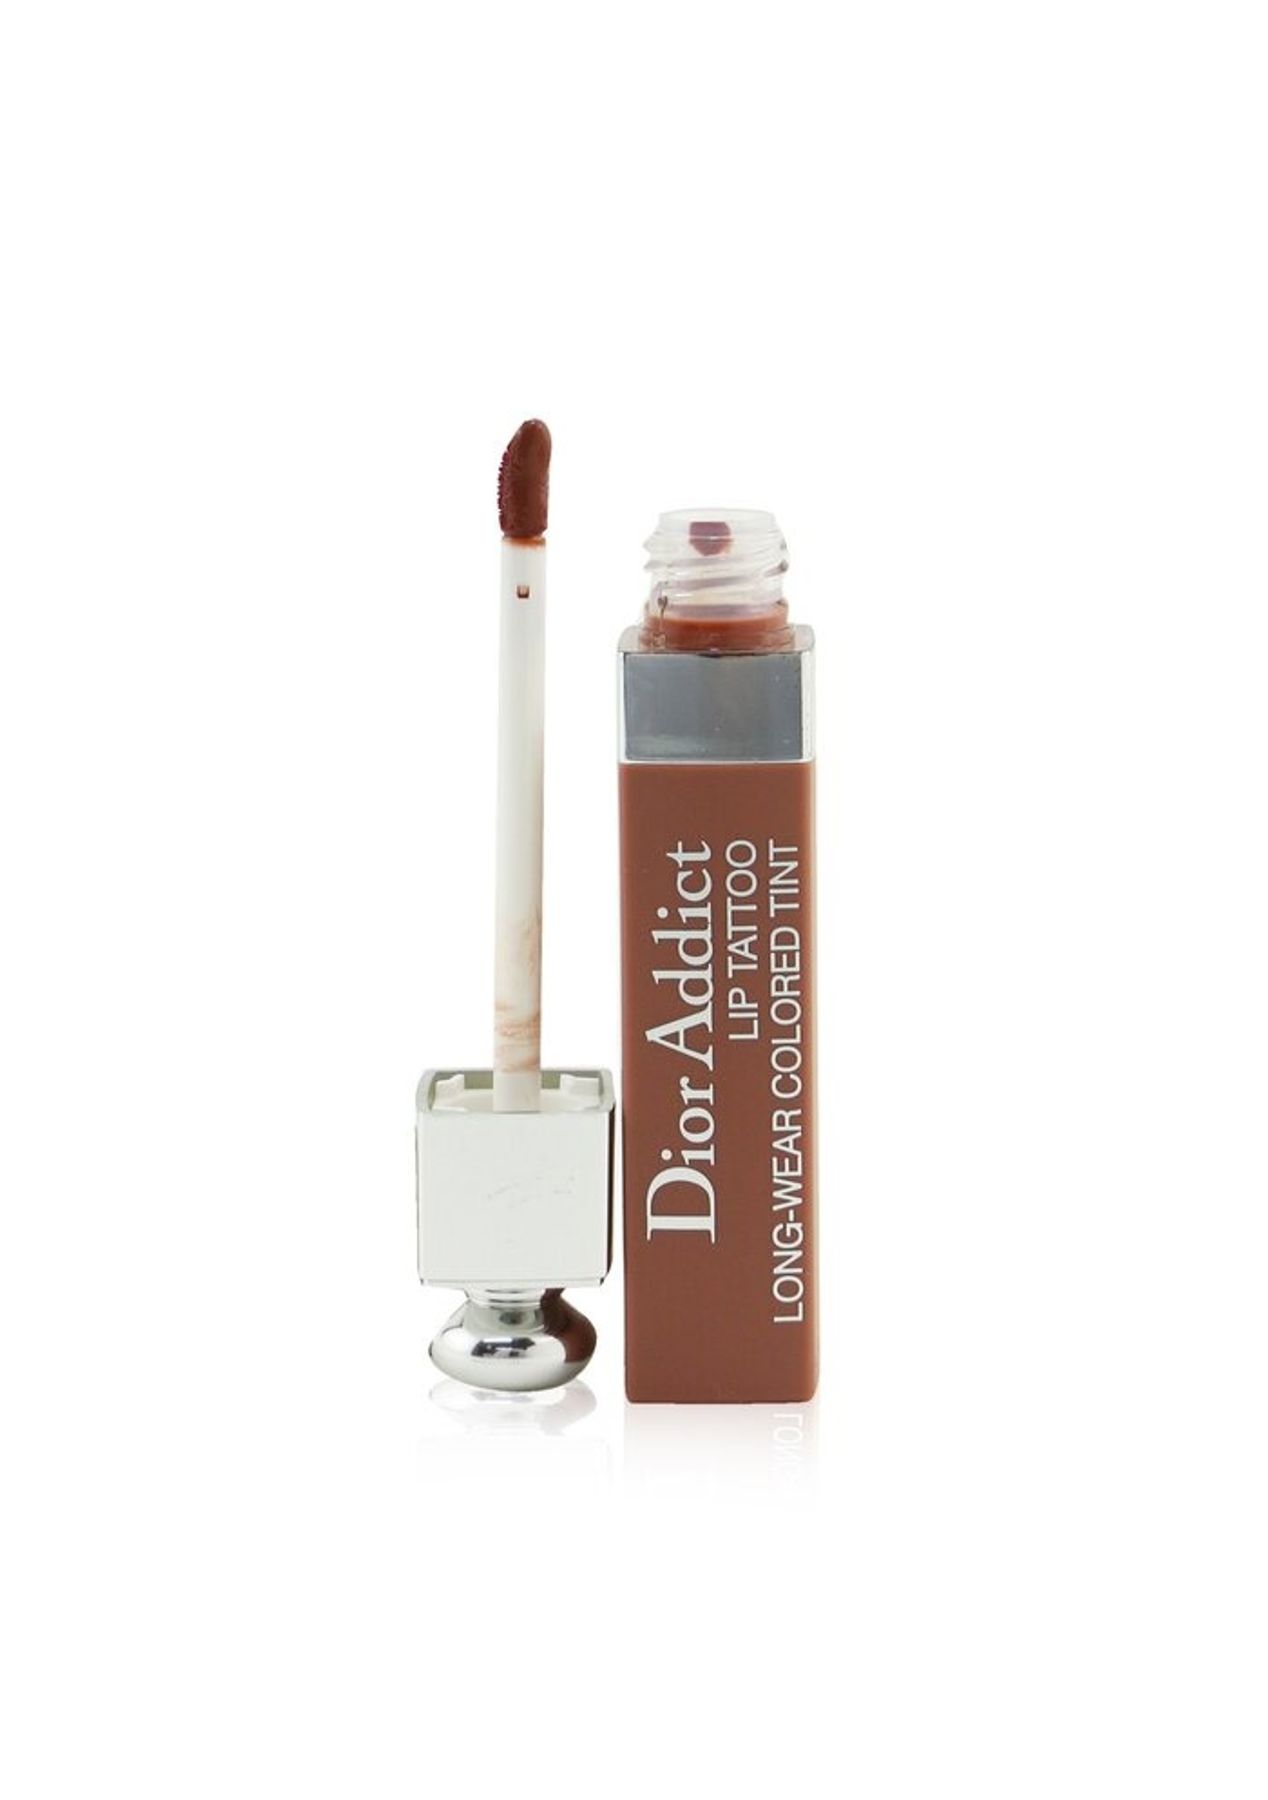  Son Tint Dior Addict Lip Tattoo Long Wear Colored Tint   Son tint   TheFaceHoliccom